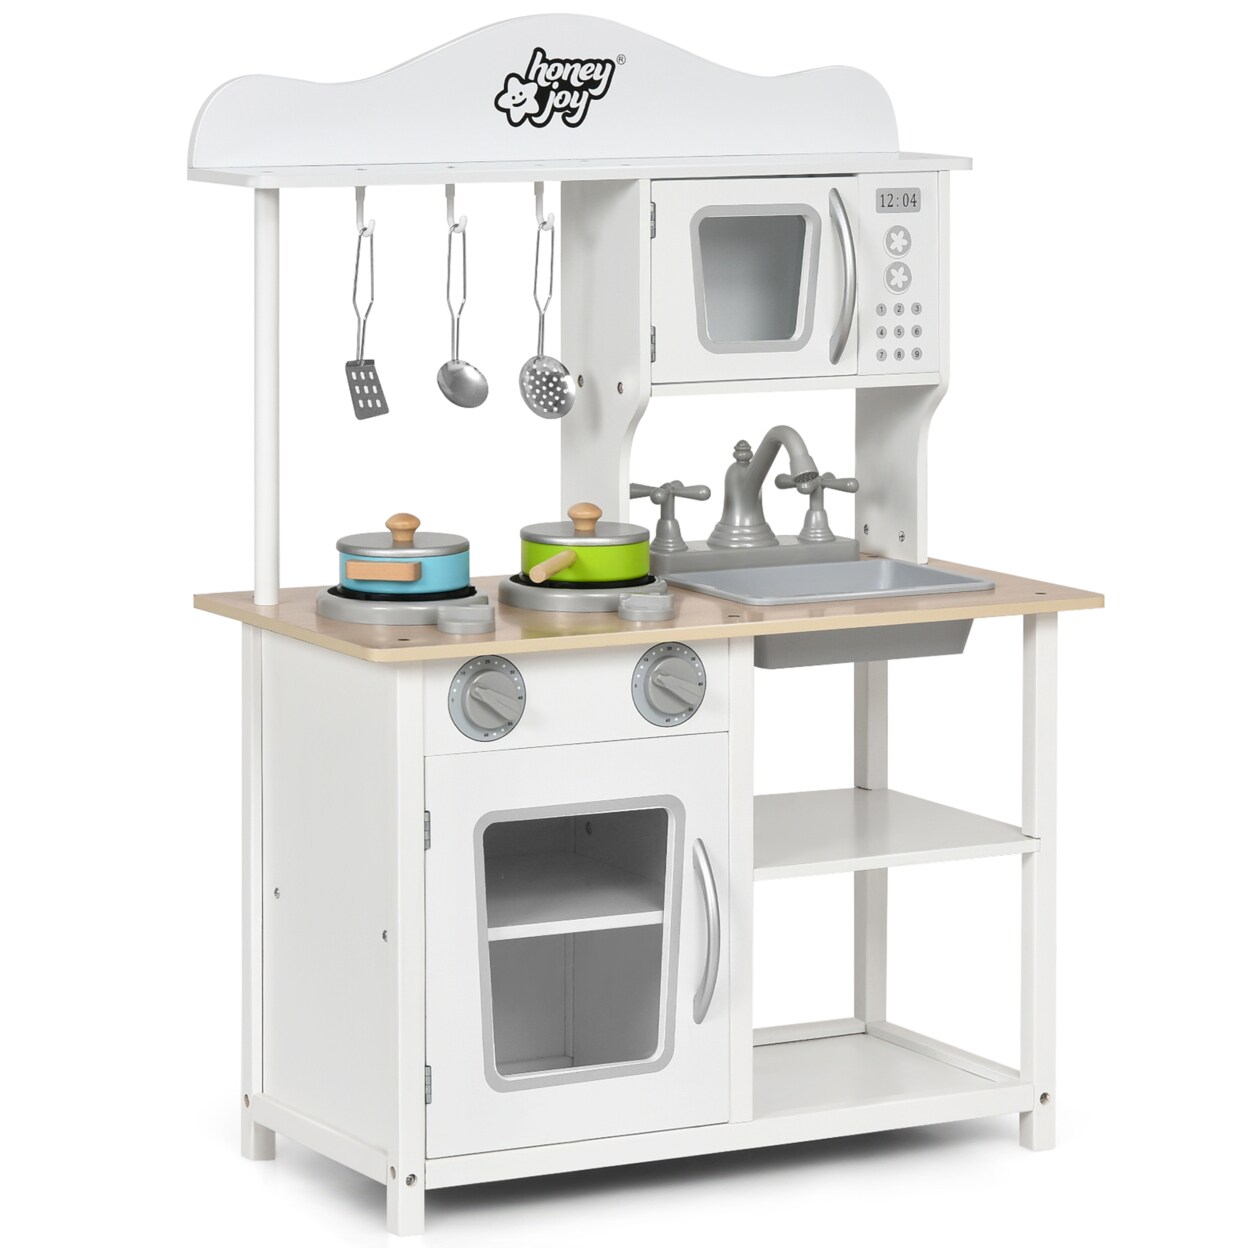 The Best Wooden Play Kitchens and Accessories